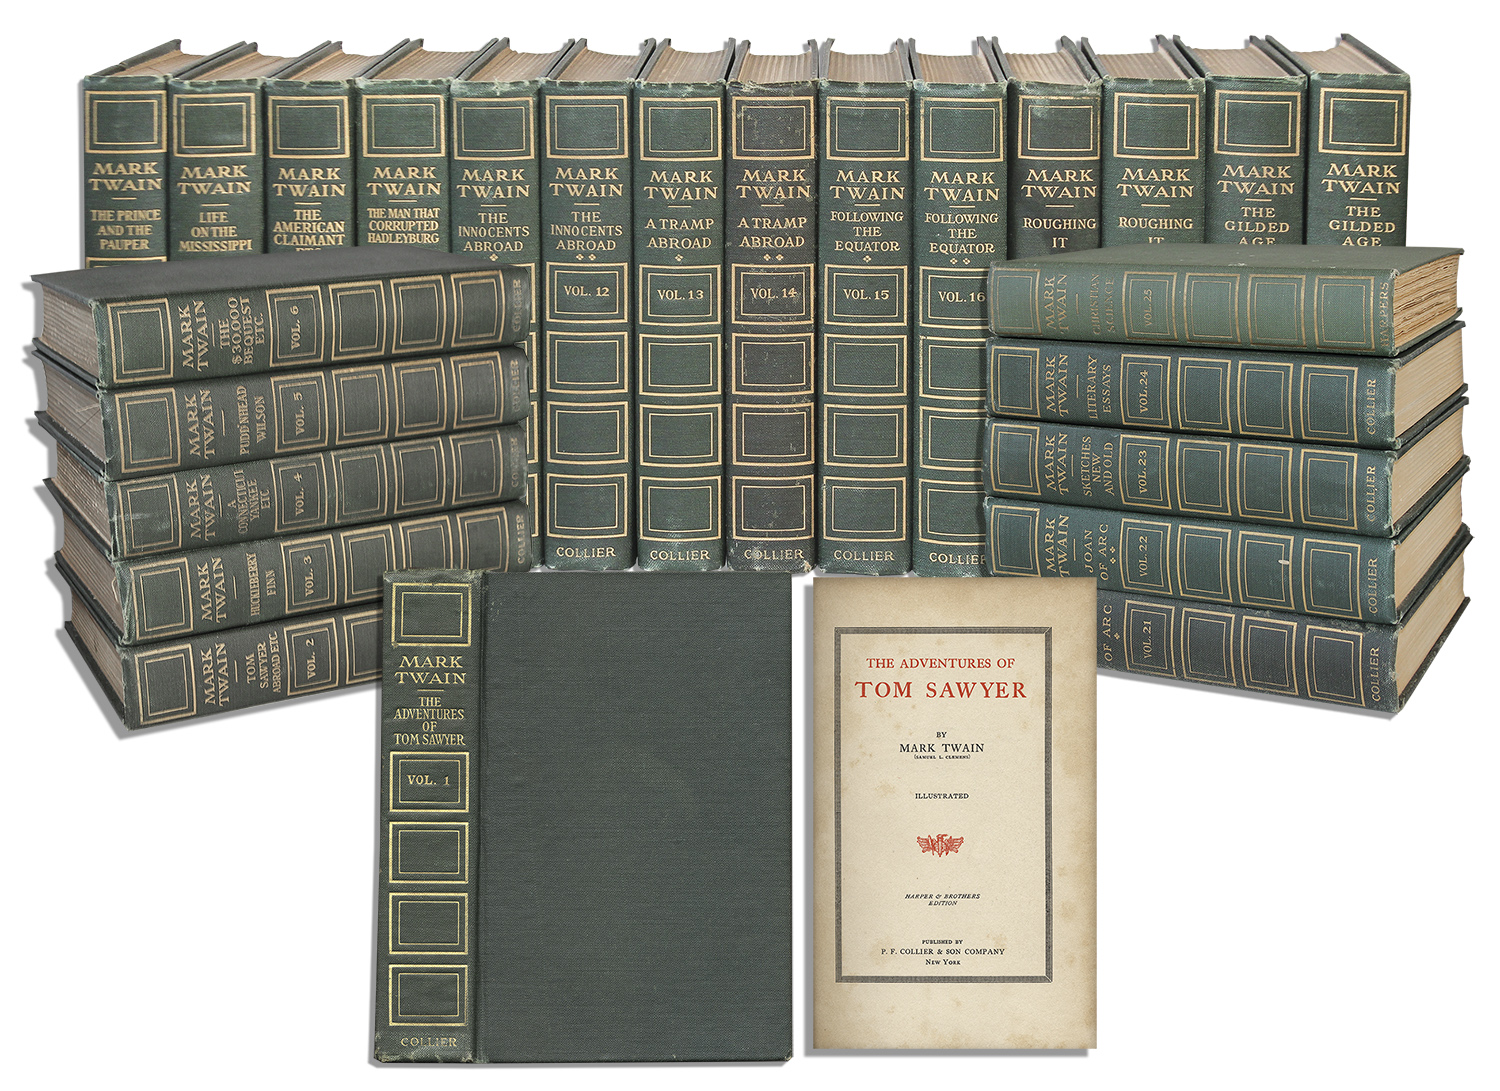 Mark collection. Mark Twain works. Twain Mark "collected works".